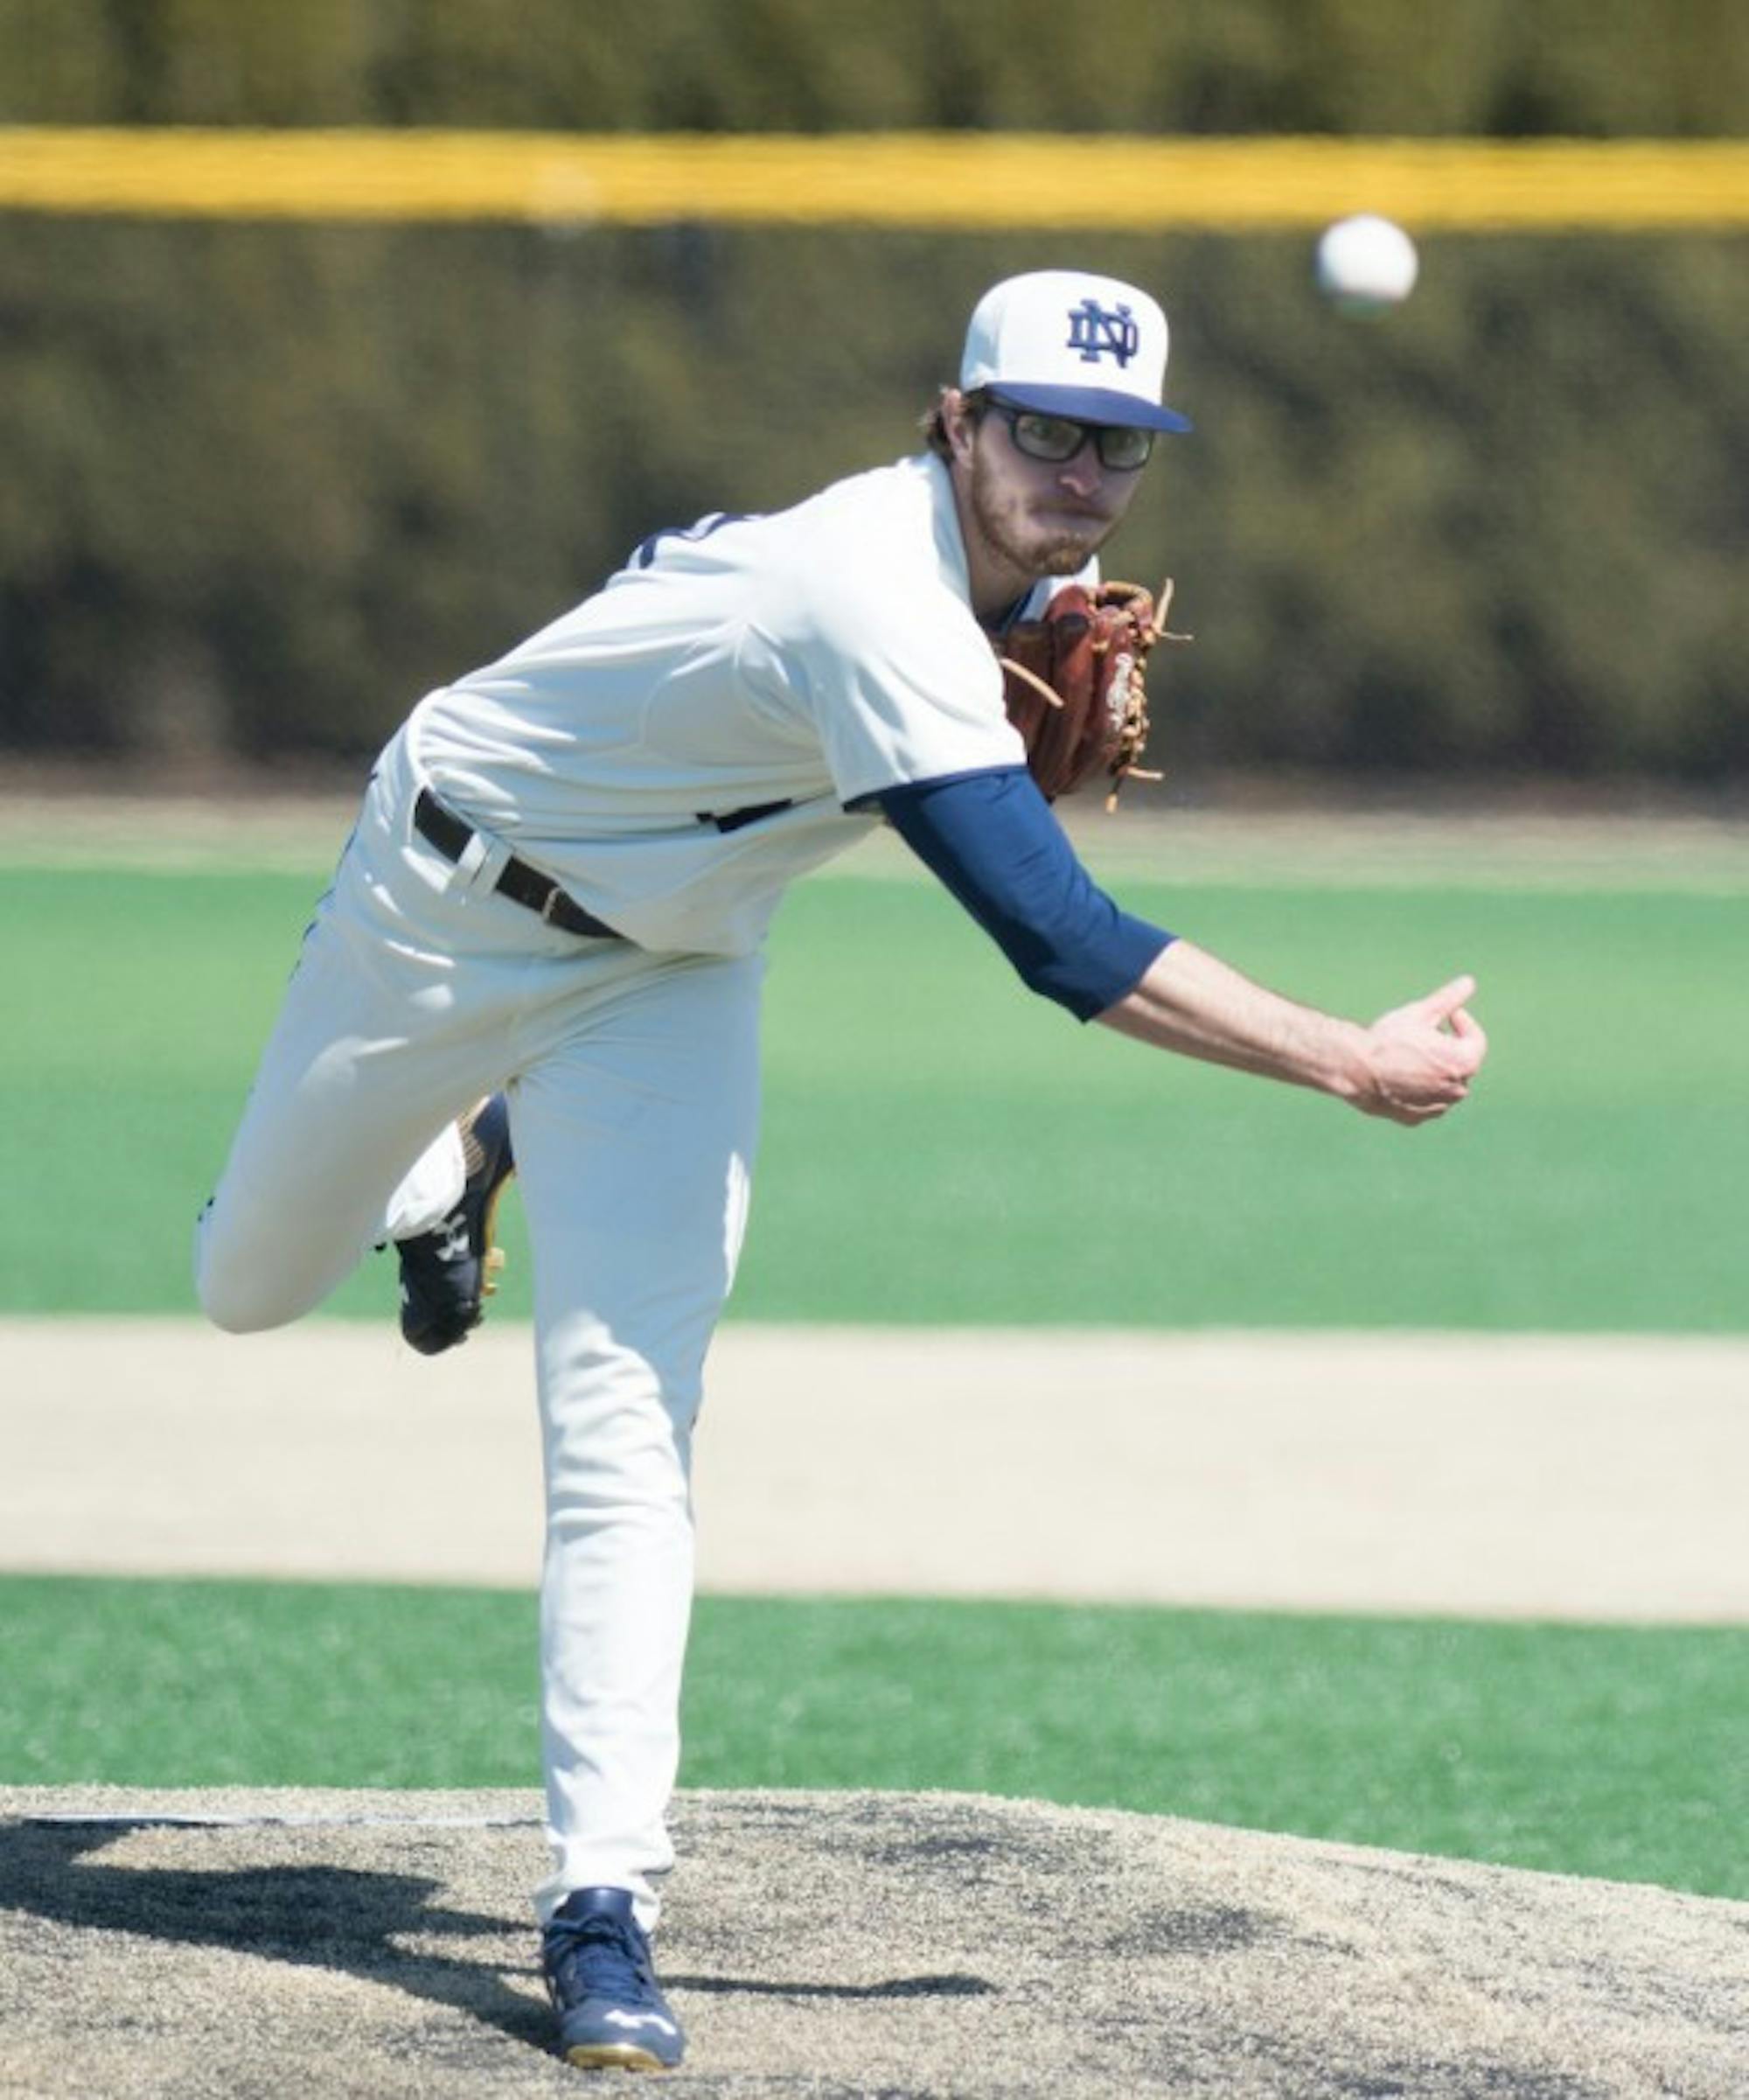 Senior pitcher Scott Kerrigan throws a pitch in a 4-2 loss to  Virginia on Mar. 28 at Frank Eck Stadium.